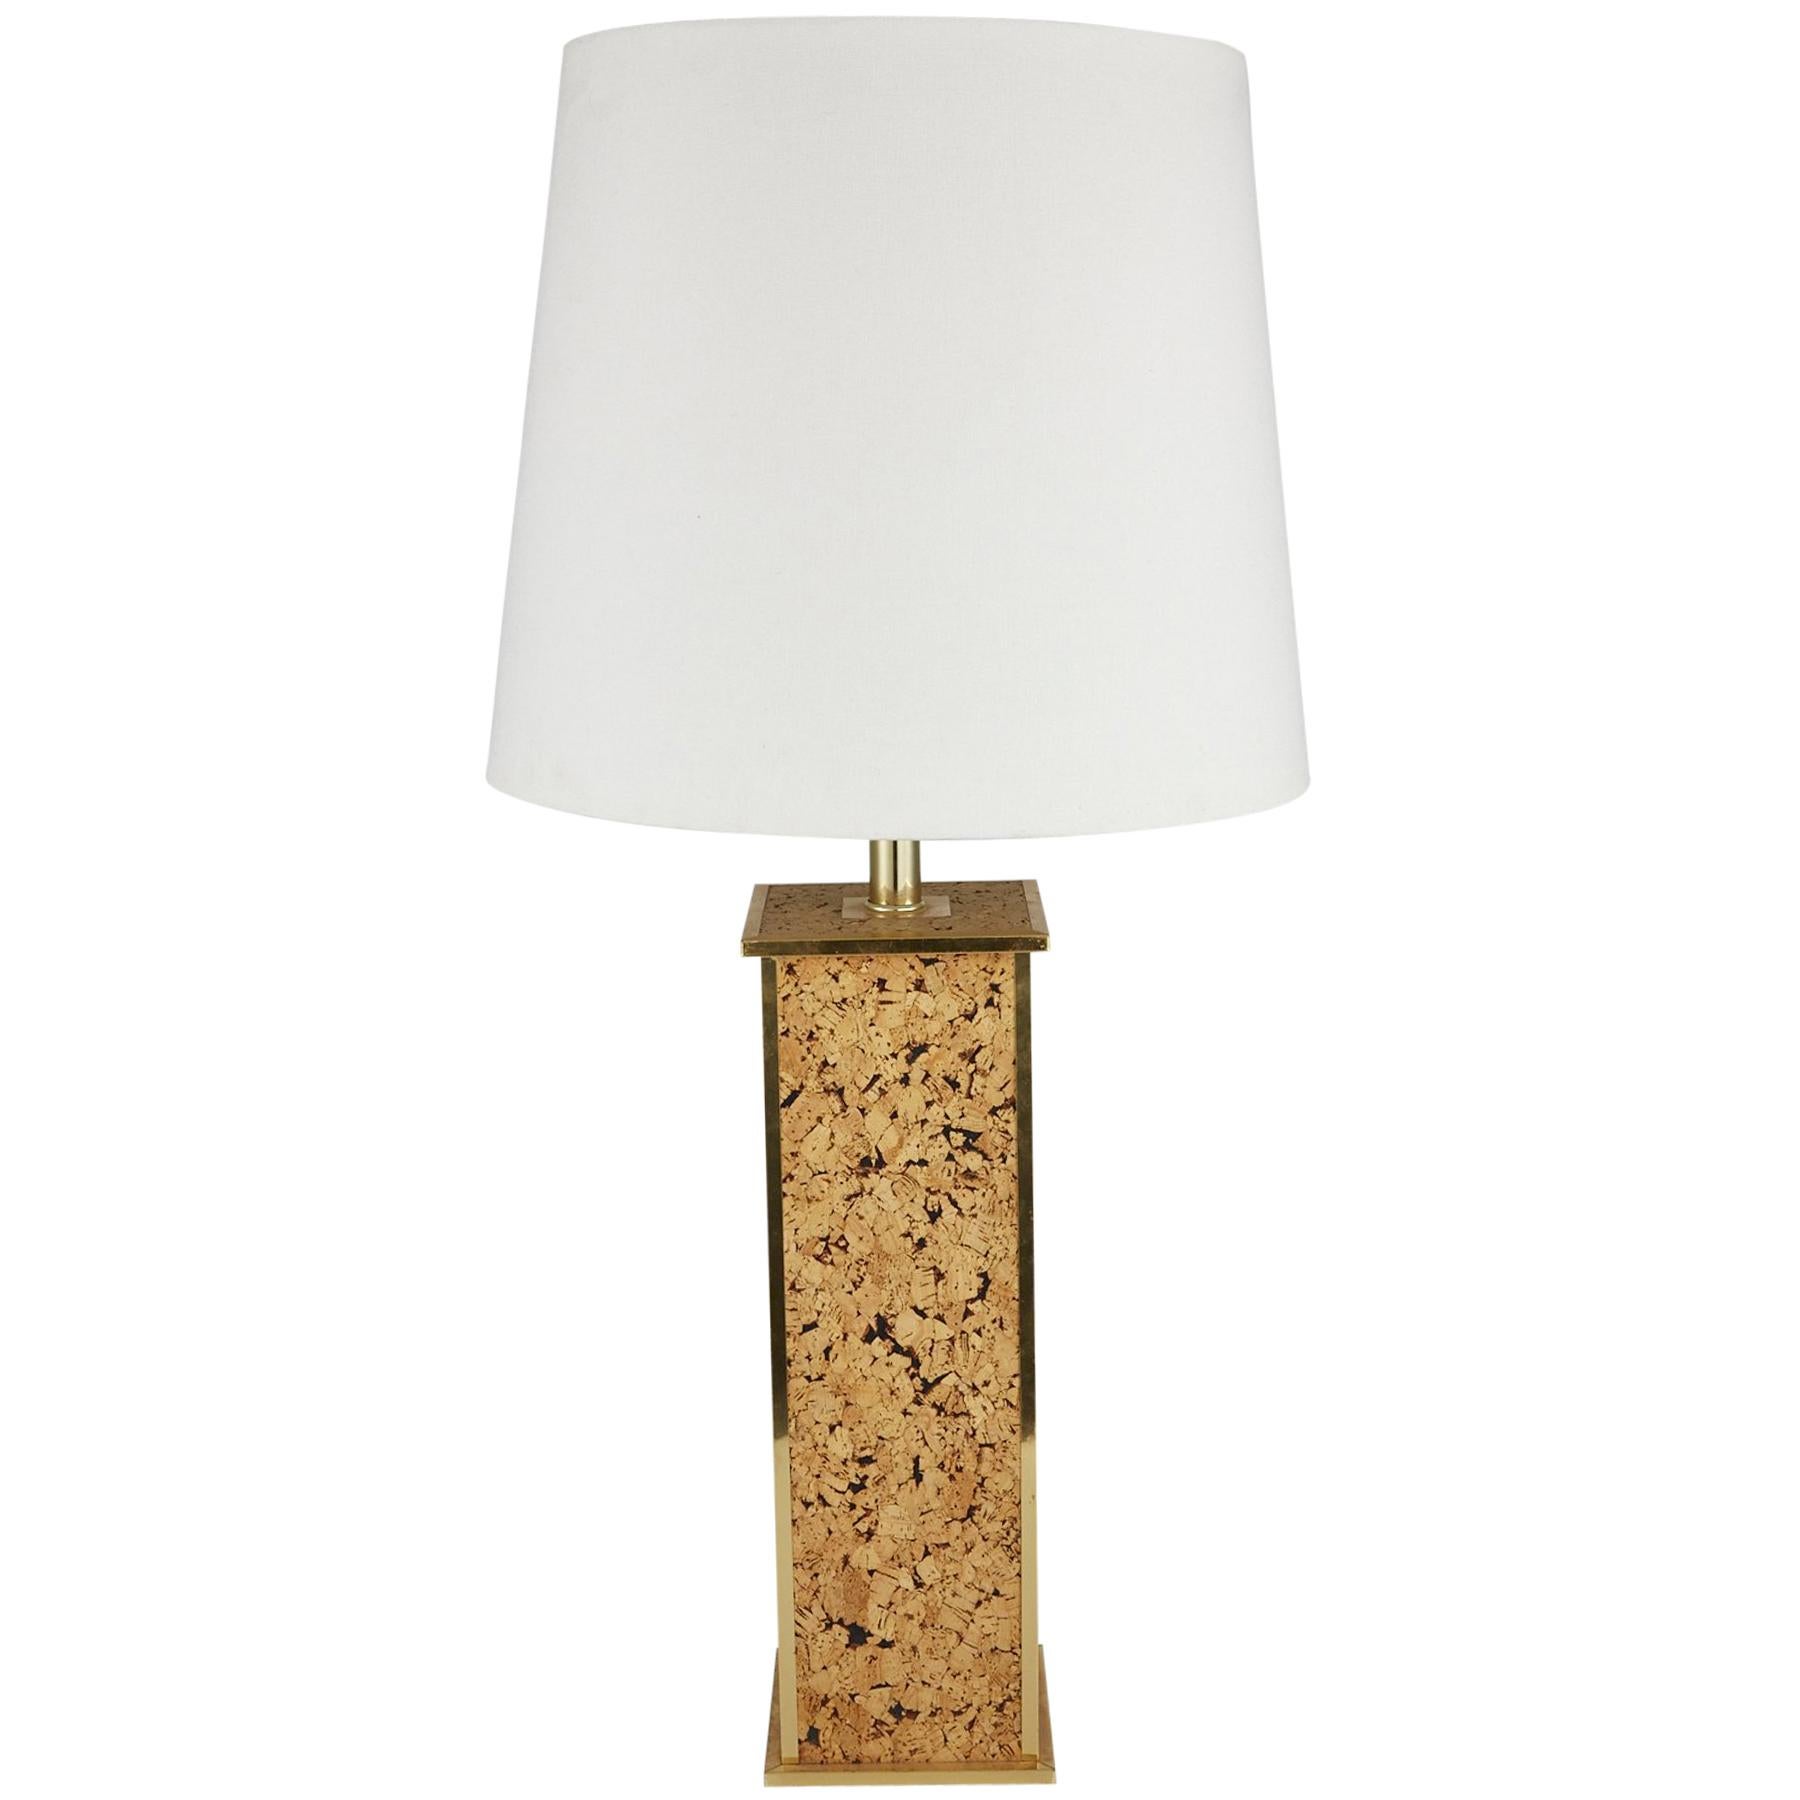 Square Column Table Lamp in Cork and Brass, 1970s For Sale